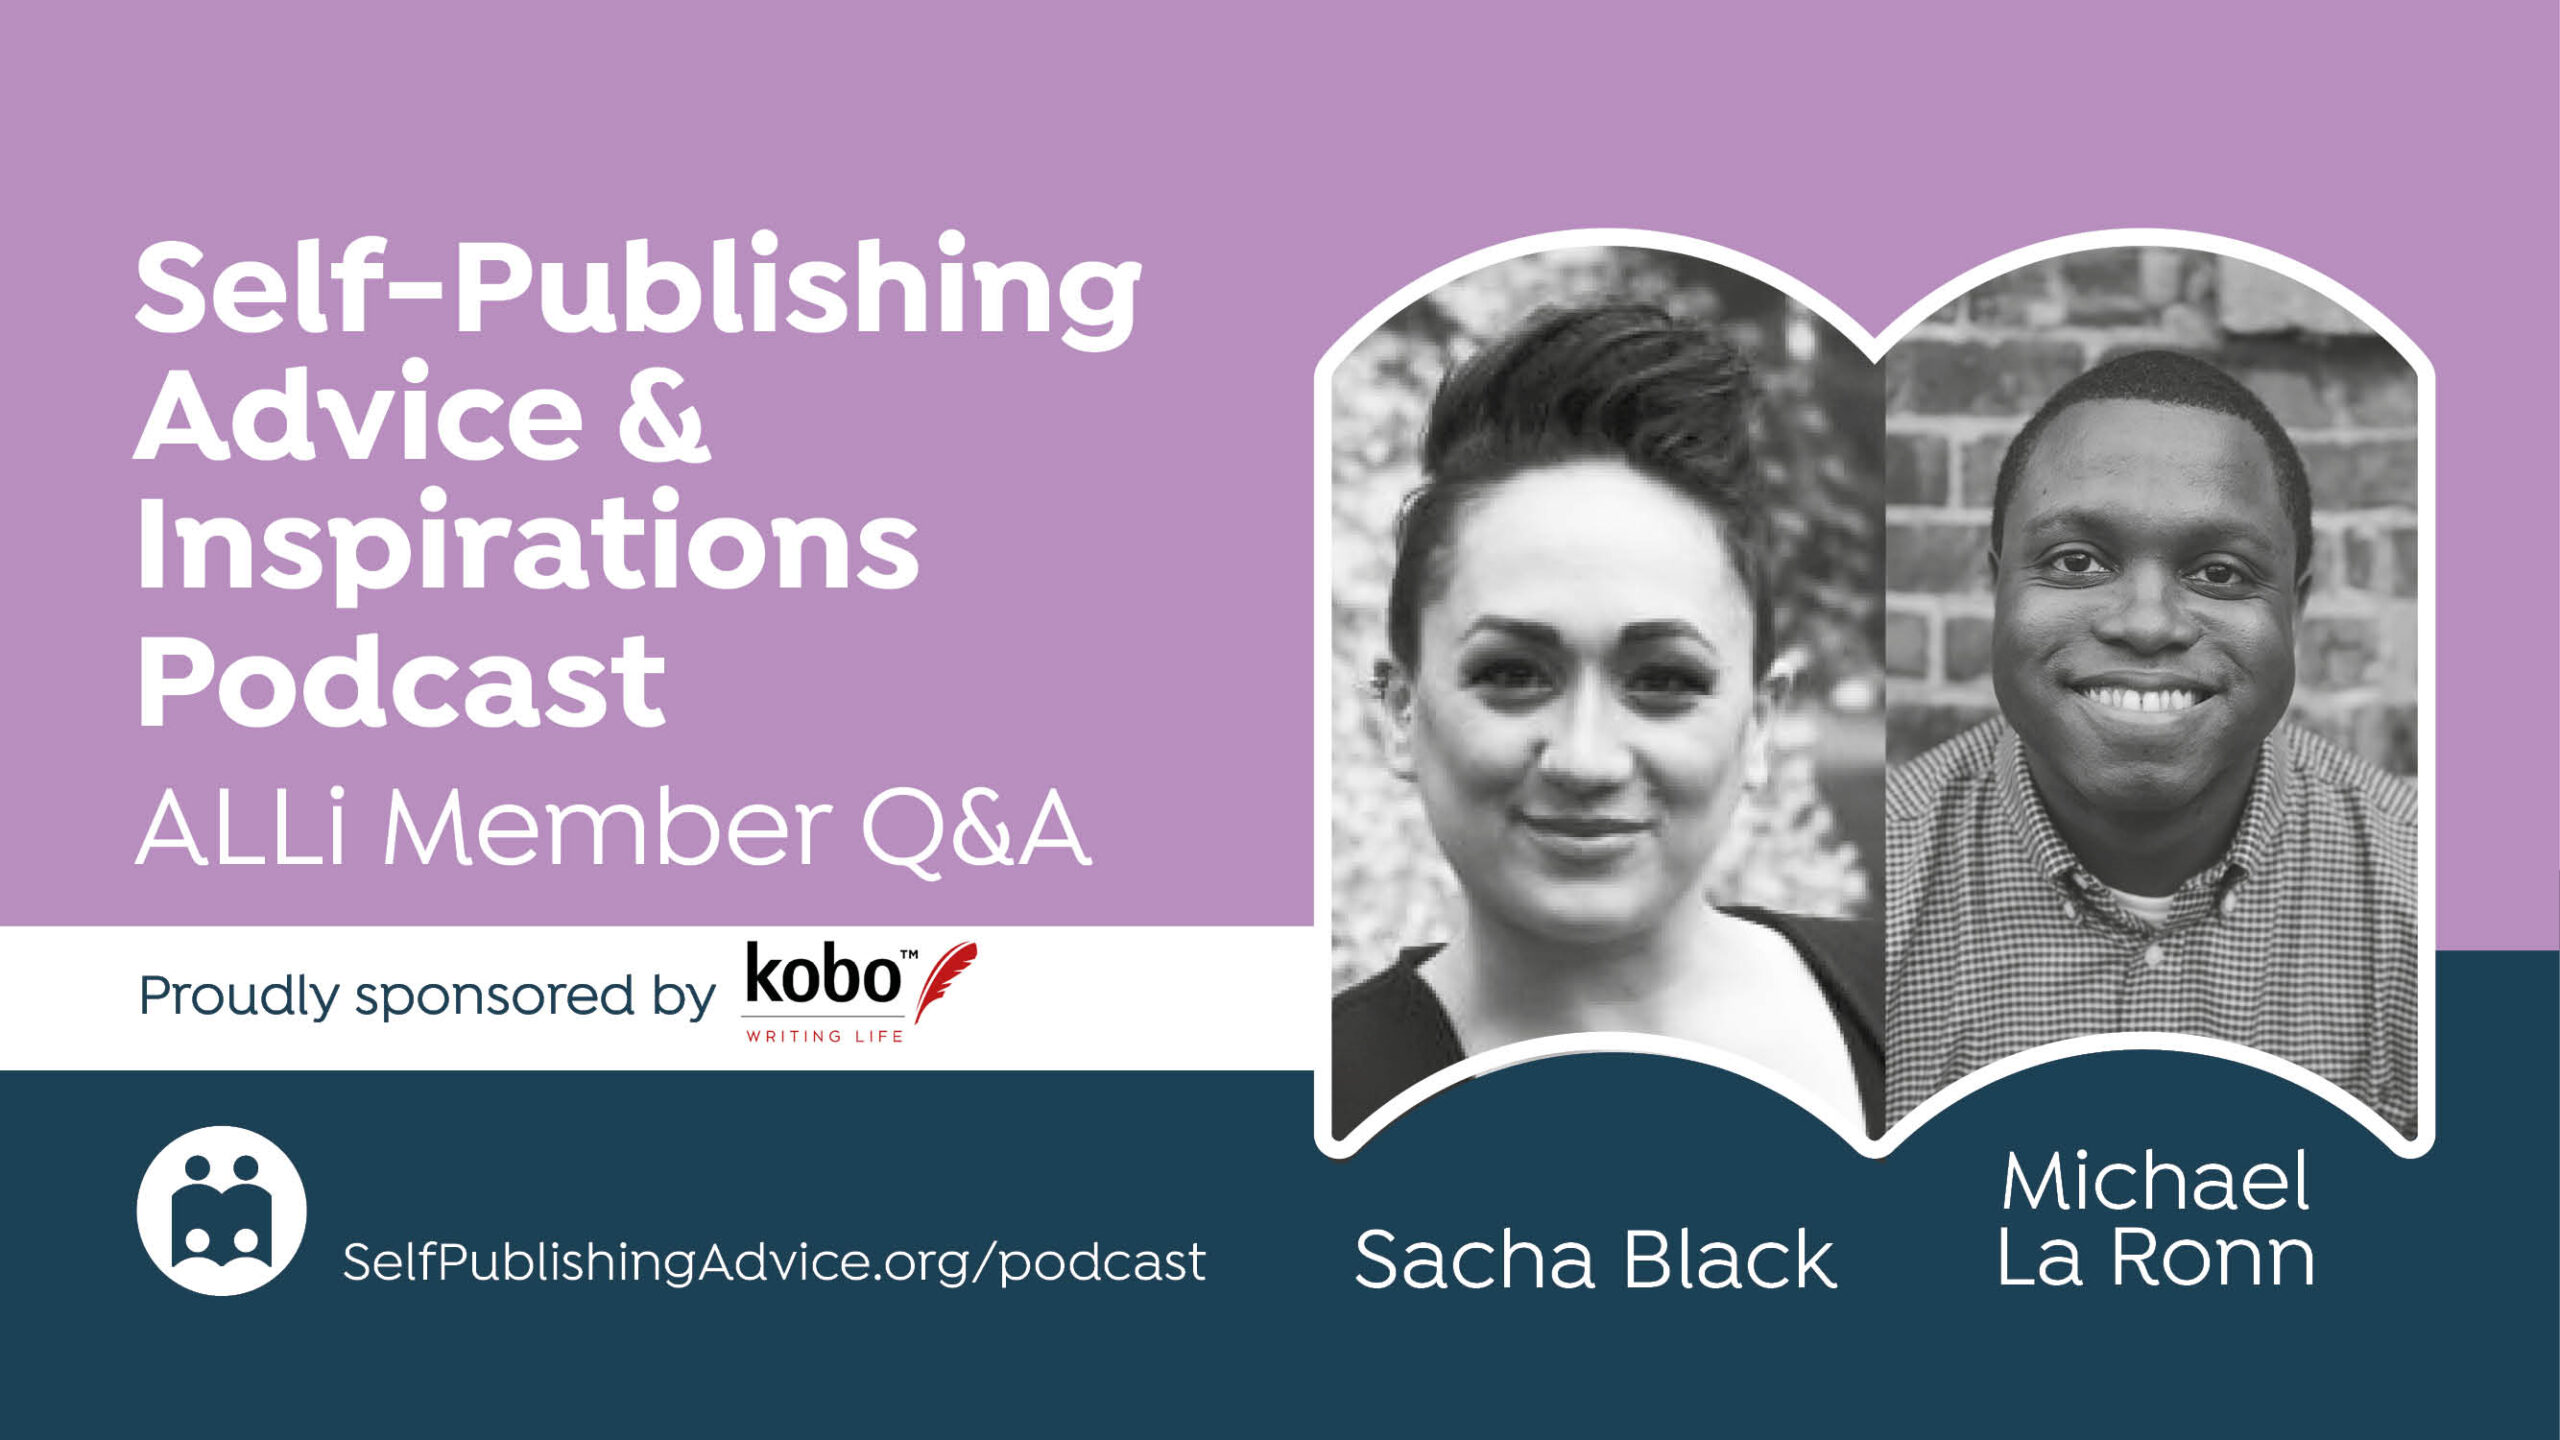 PODCAST: Categories, Kickstarters, Developmental Editors, And More In Our Member Q&A Podcast